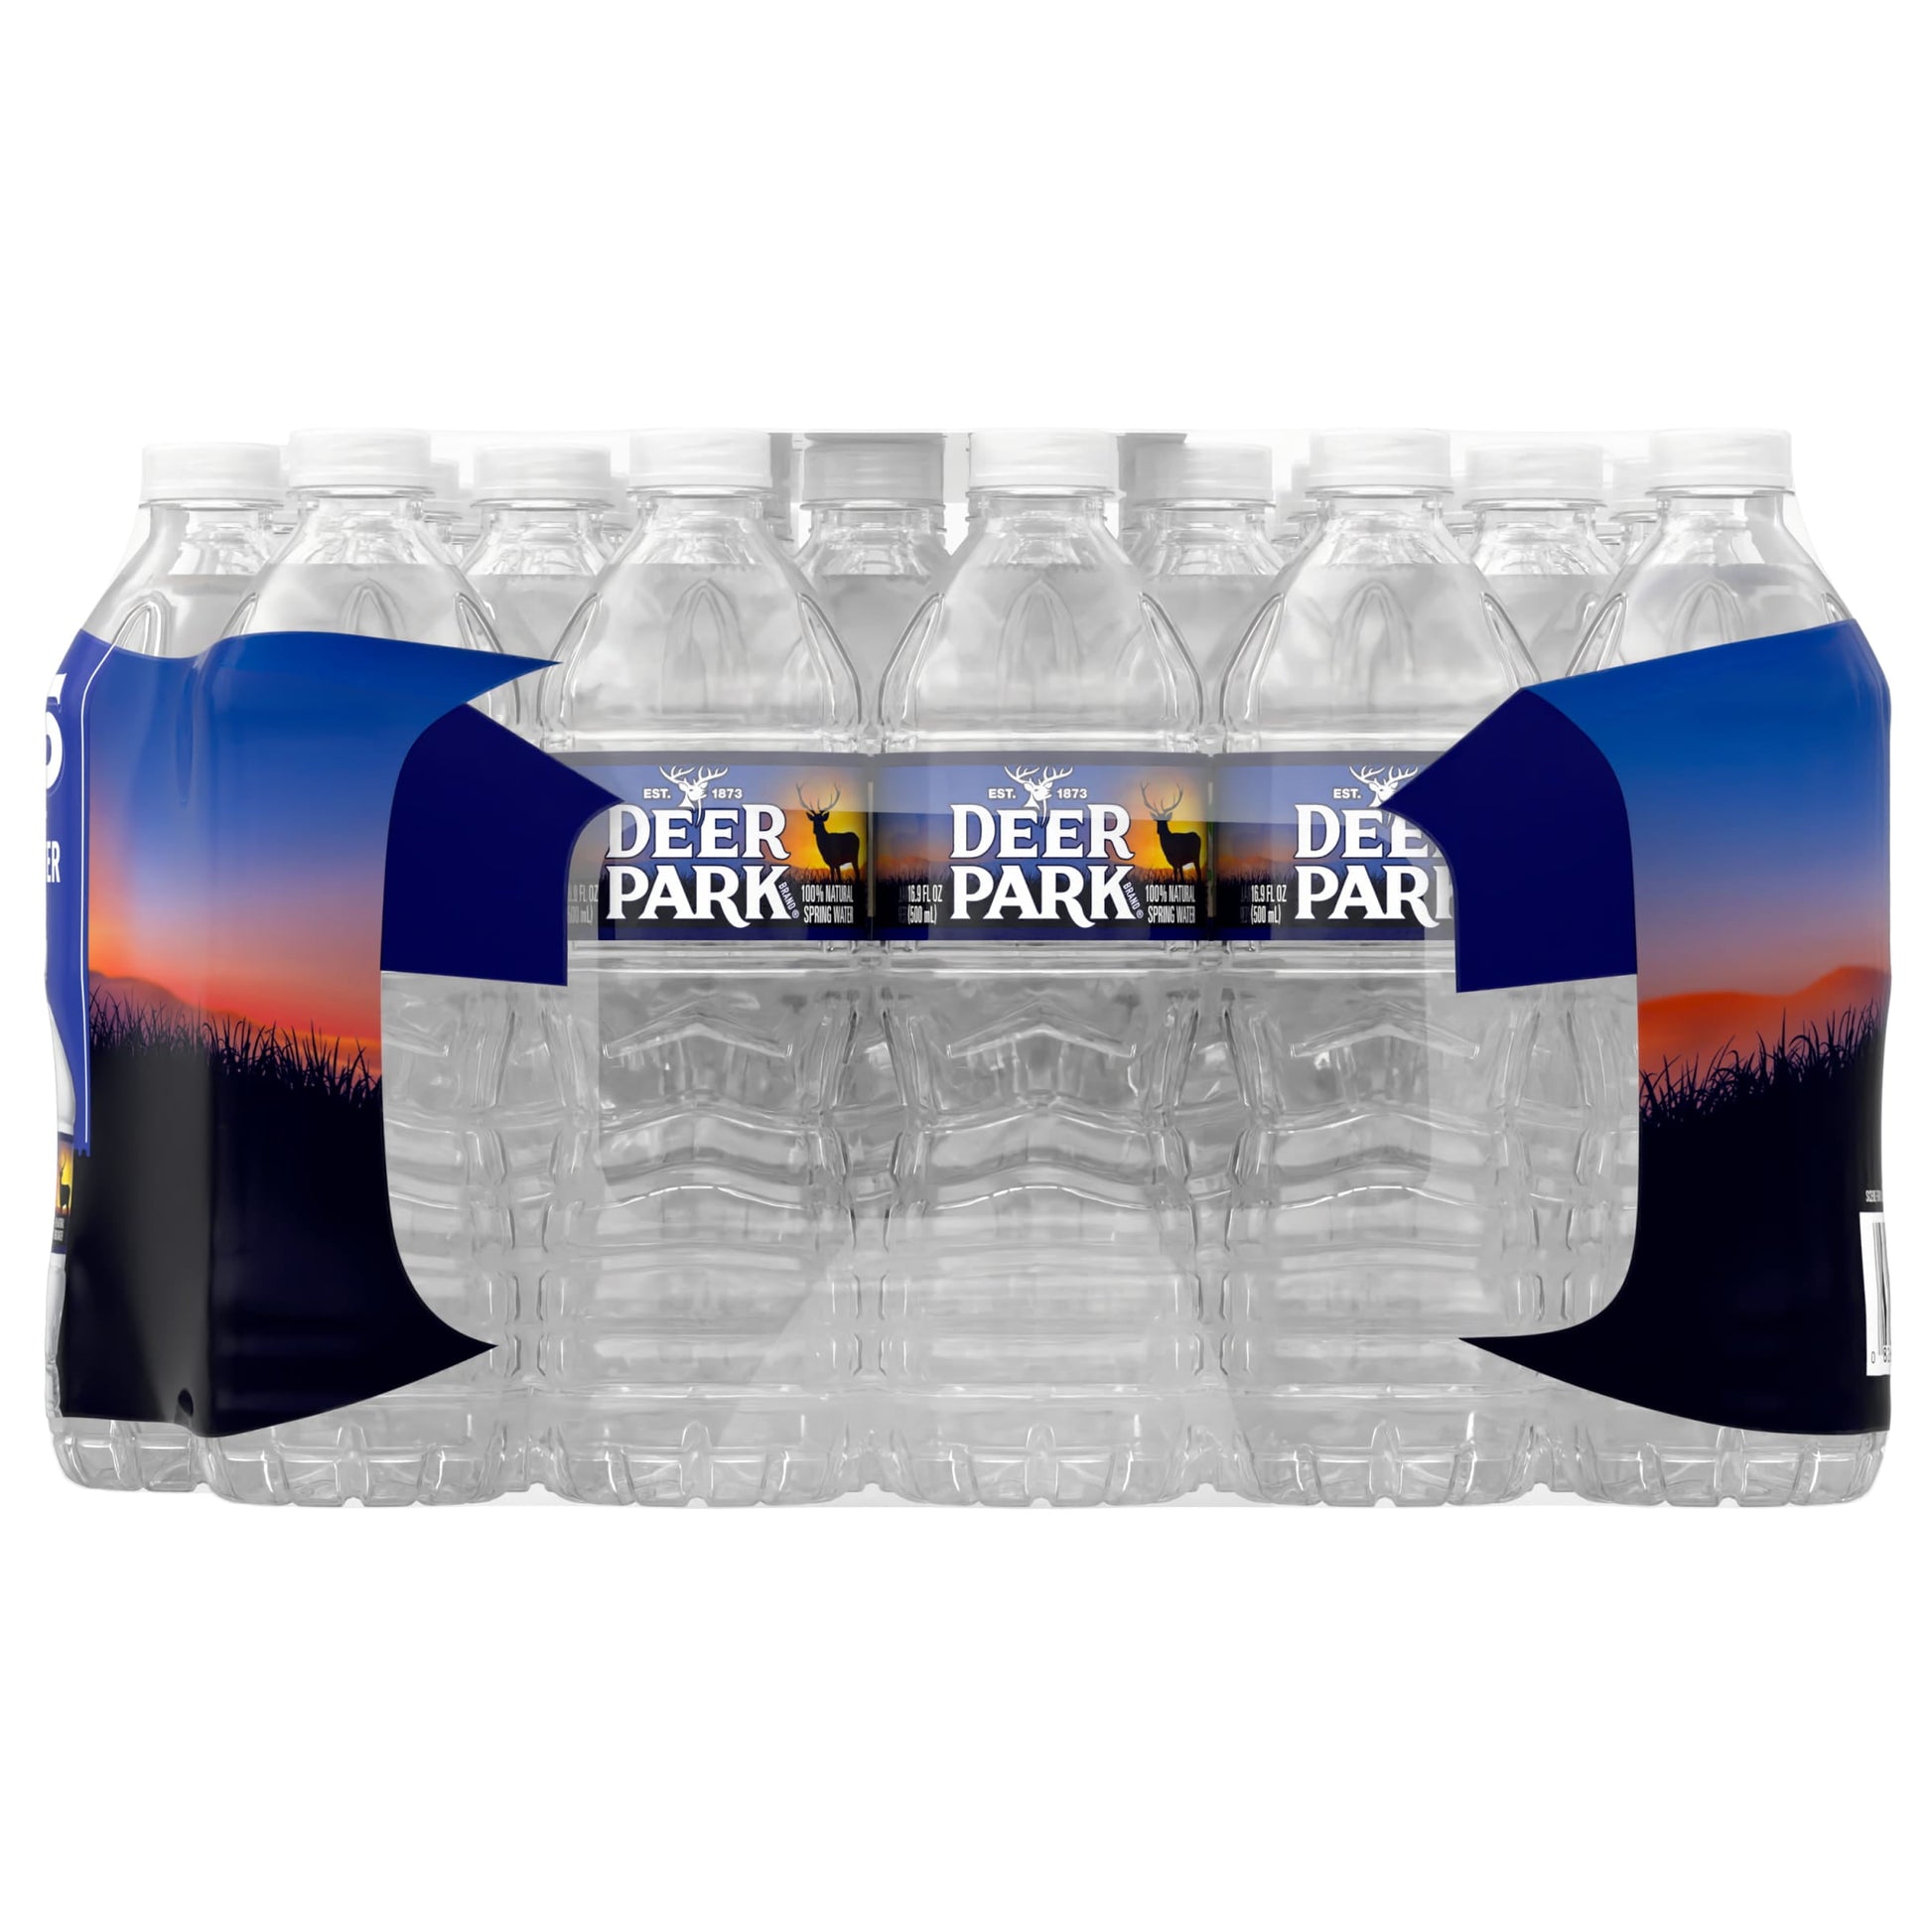 Brand 100% Natural Spring Water, 16.9-Ounce Plastic Bottles (Pack of 35)